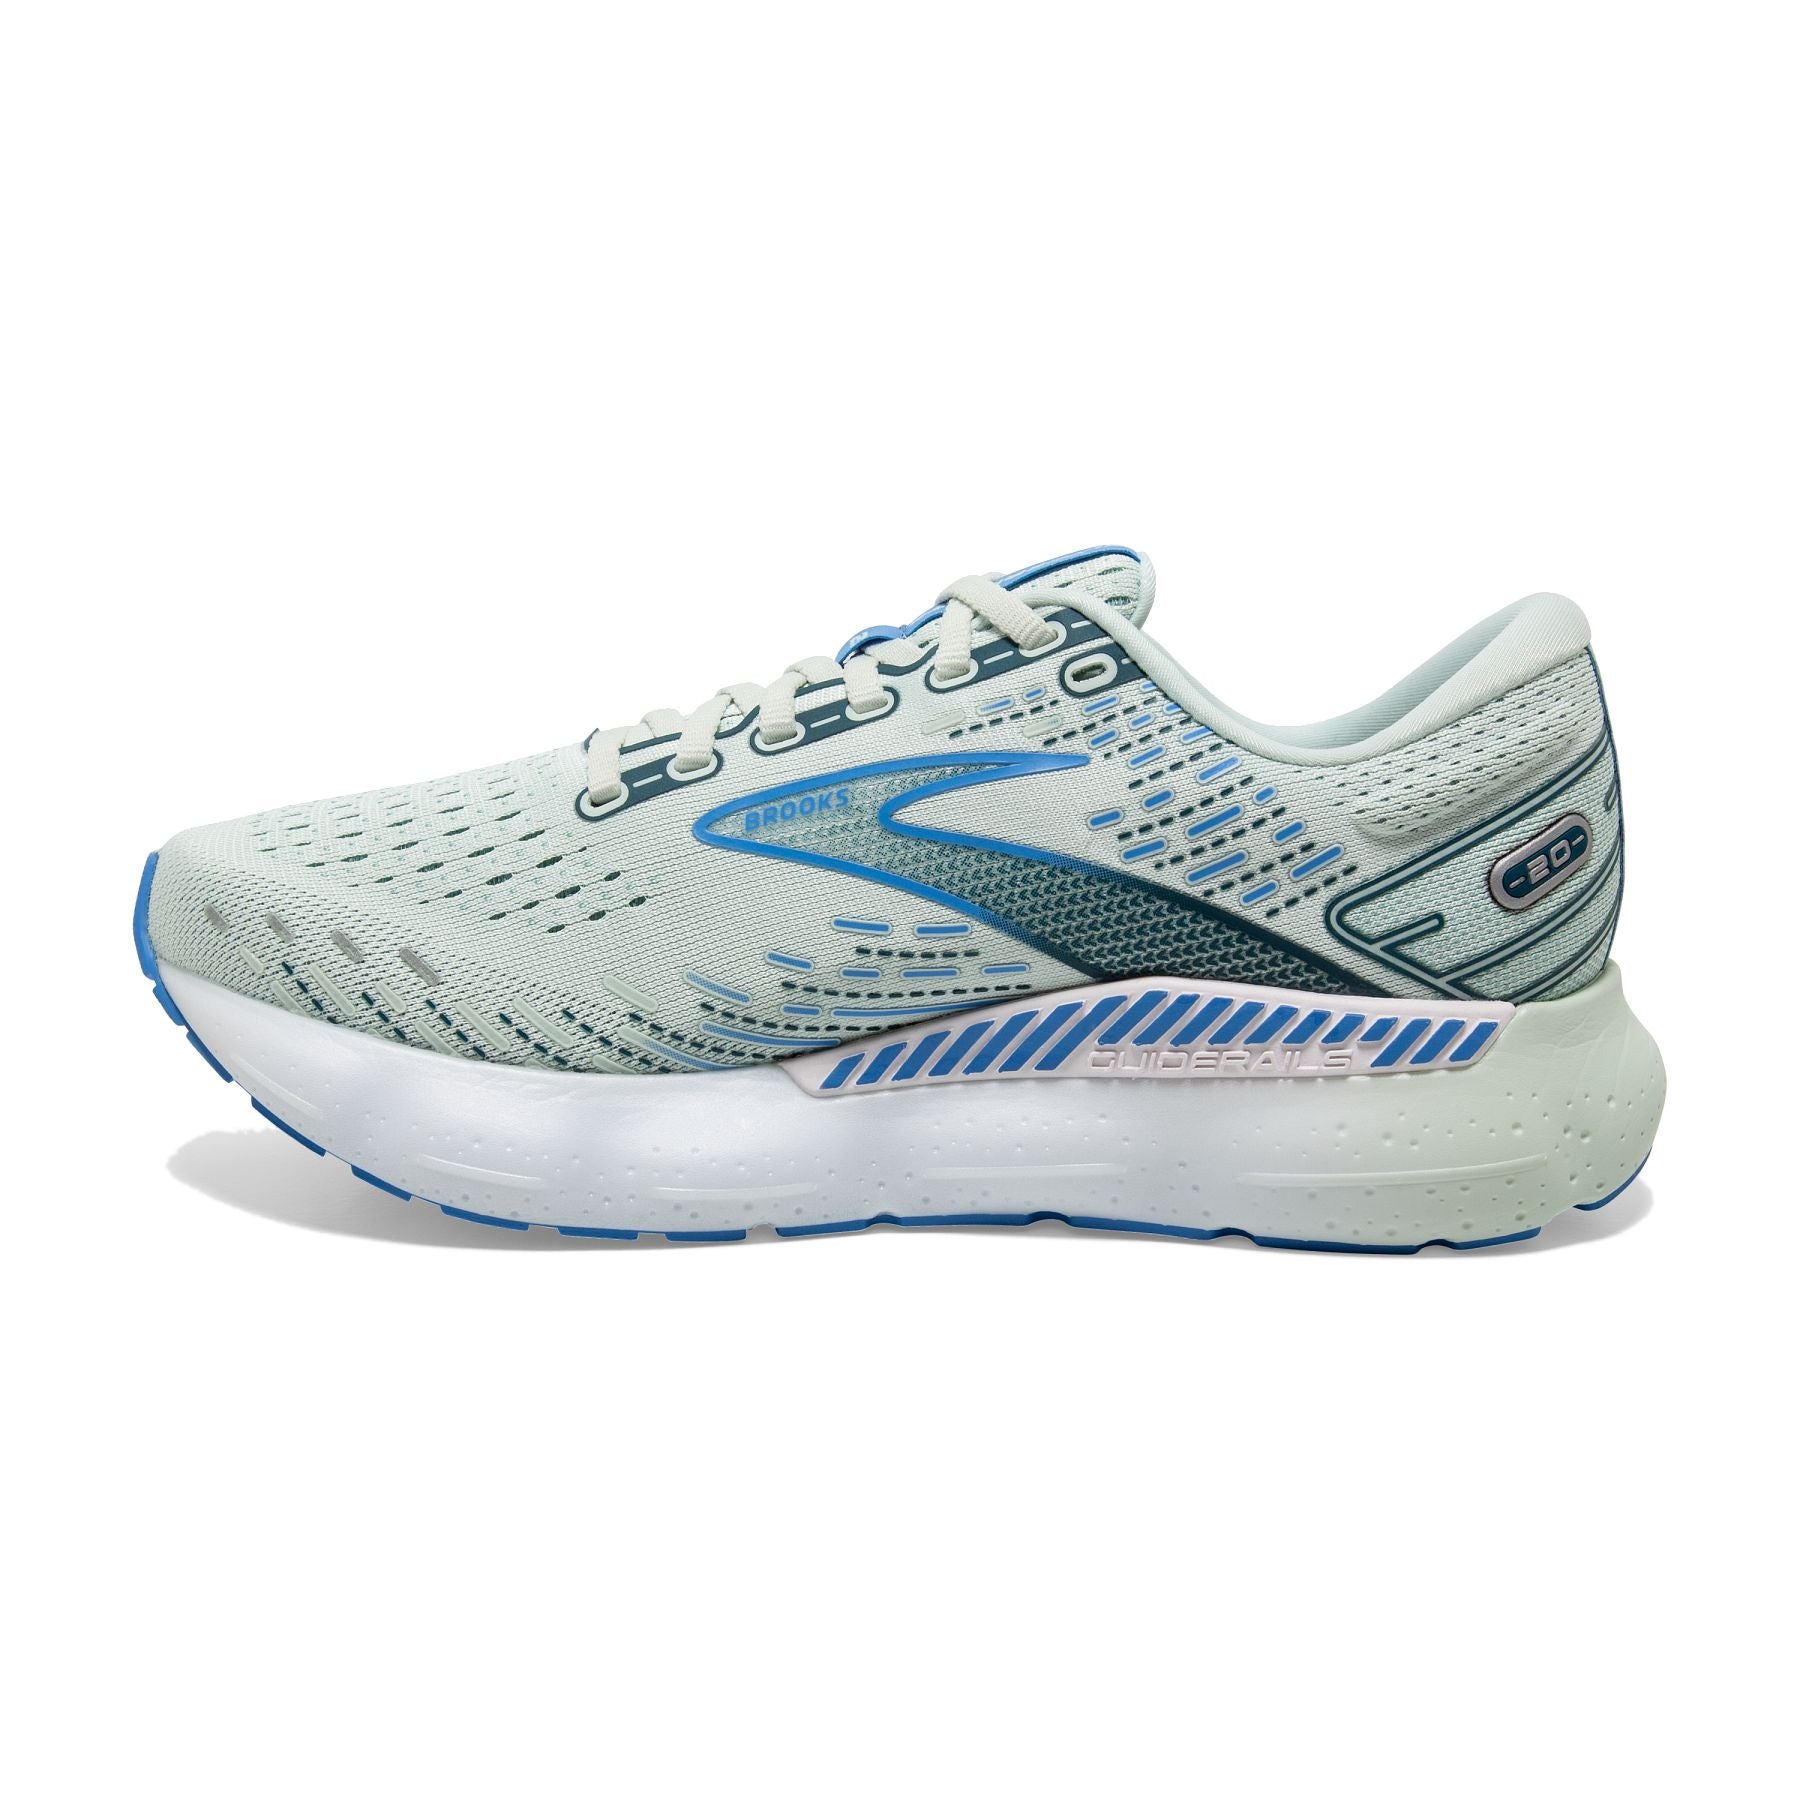 Medial view of the Women's Glycerin GTS 20 in the color Blue Glass/Marina/Legion Blue